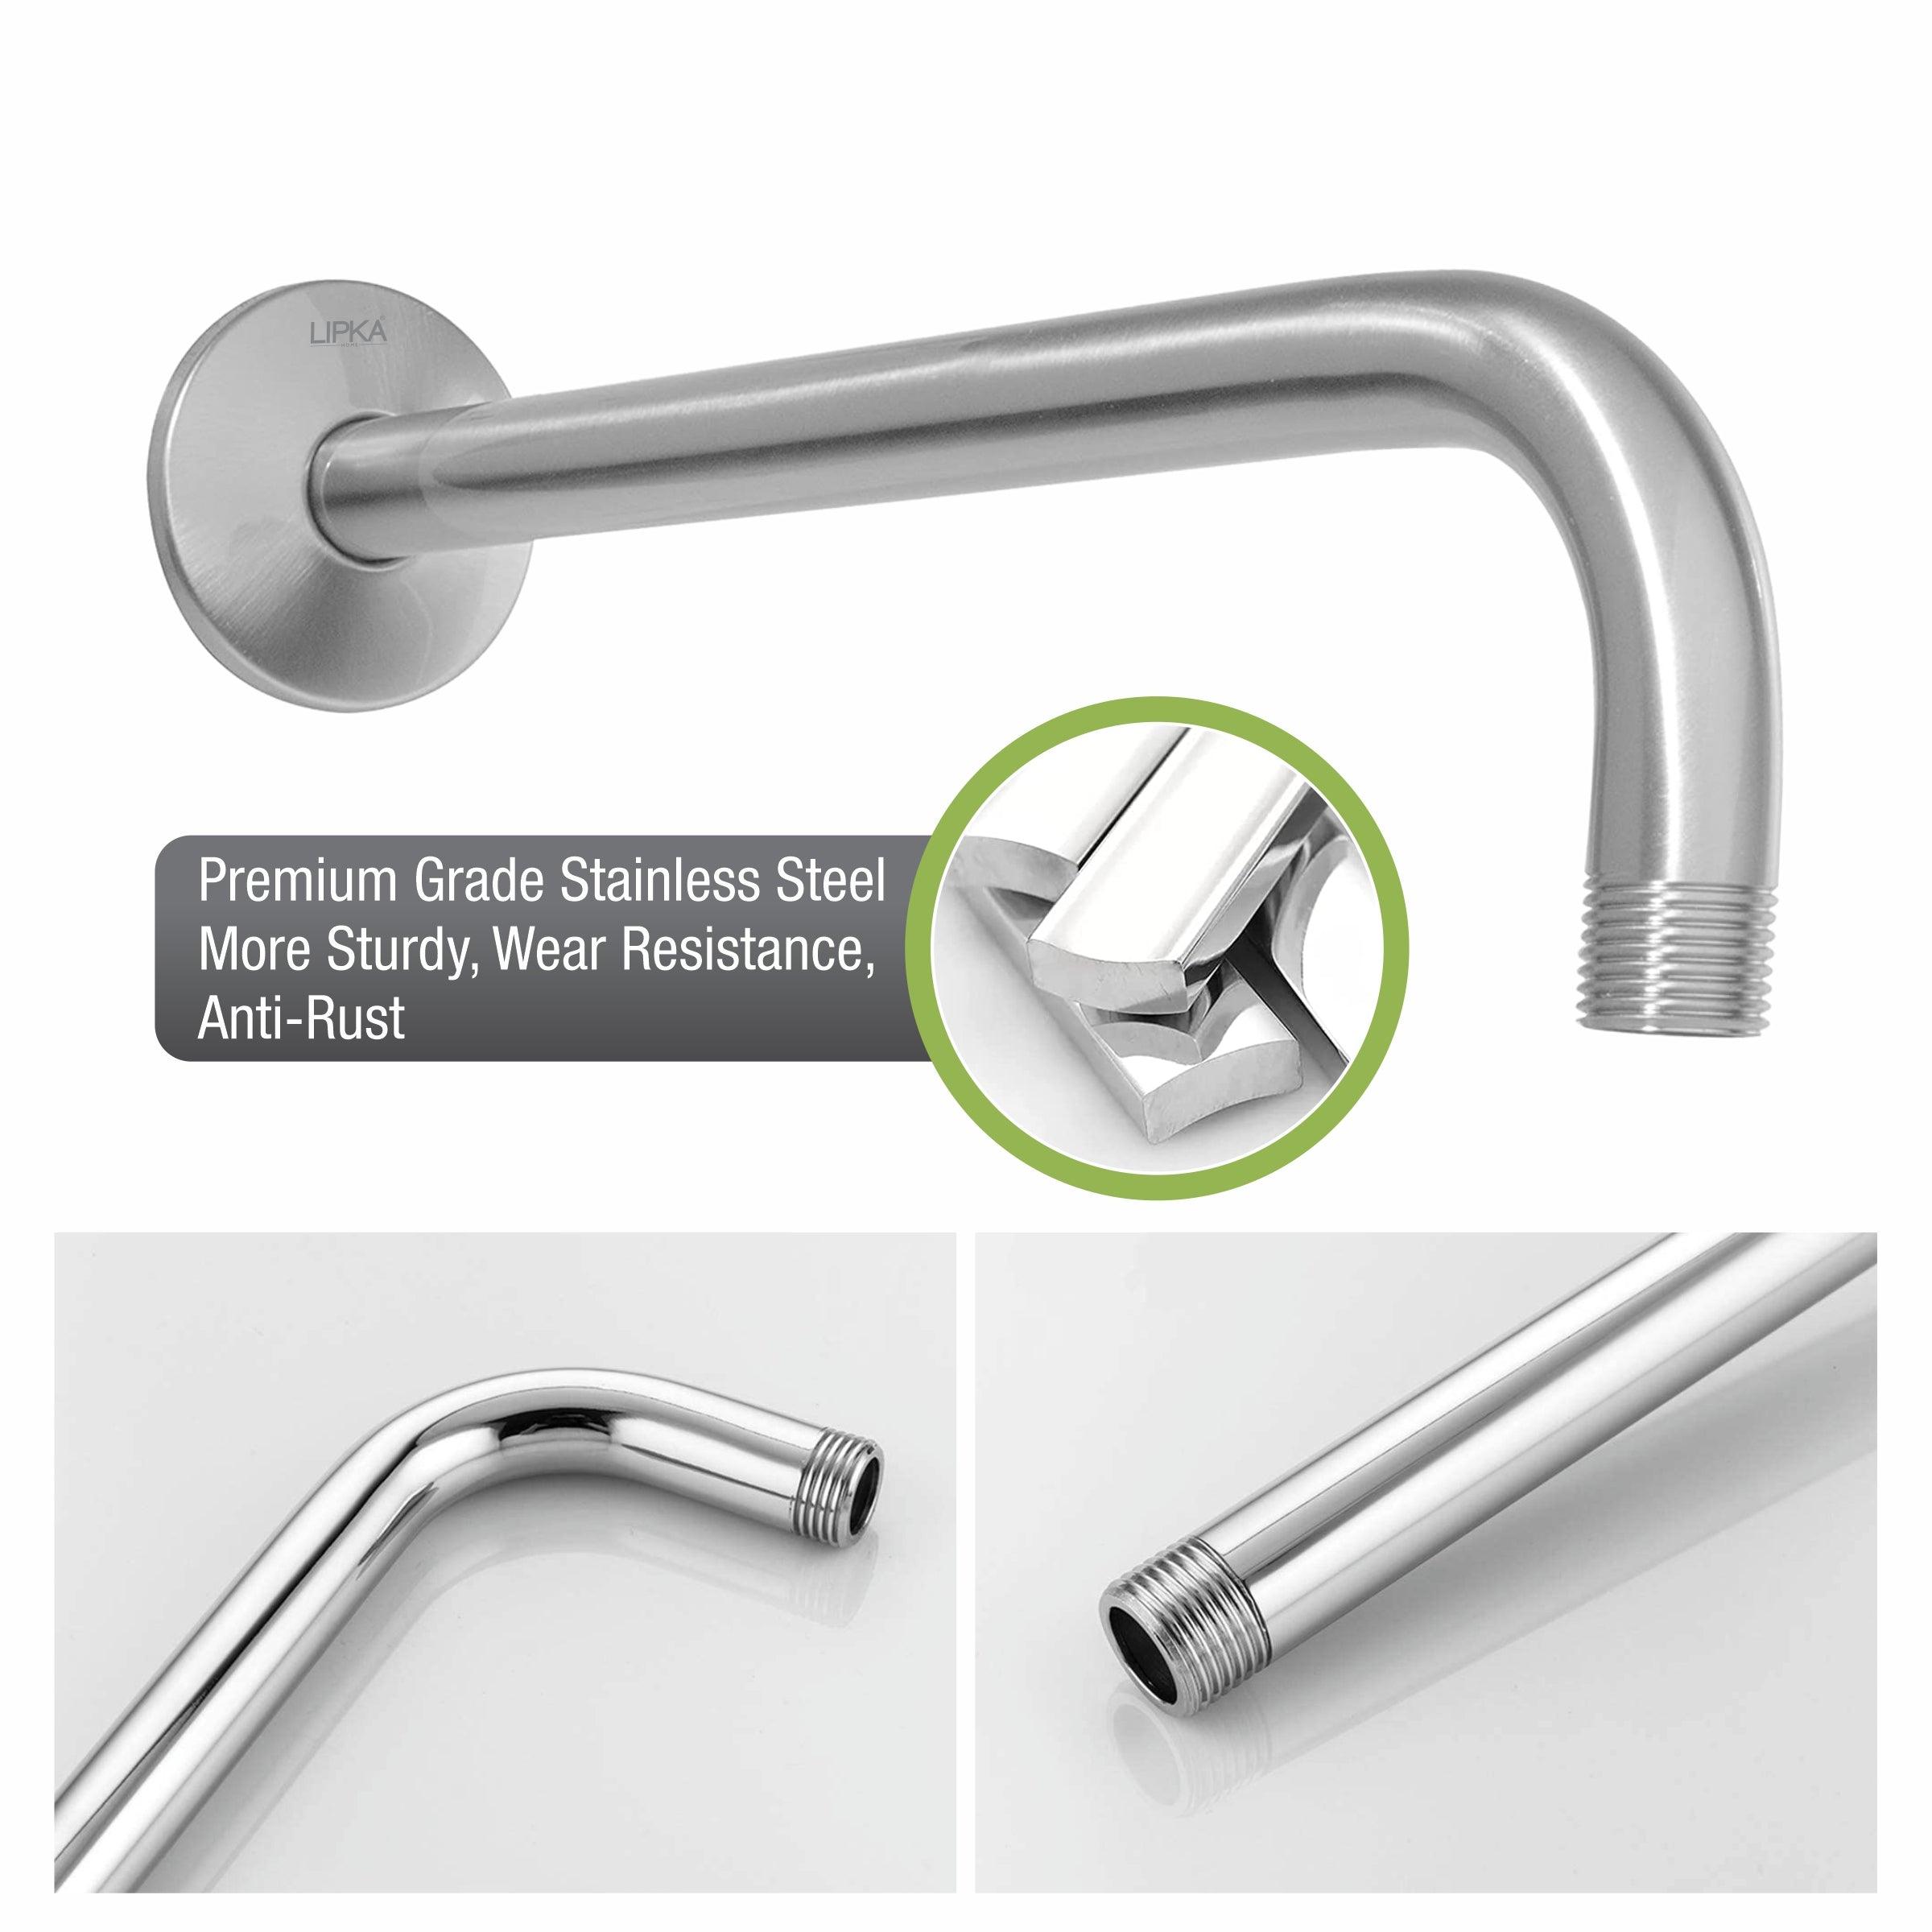 Full Bend Round Shower Arm (12 Inches) premium stainless steel